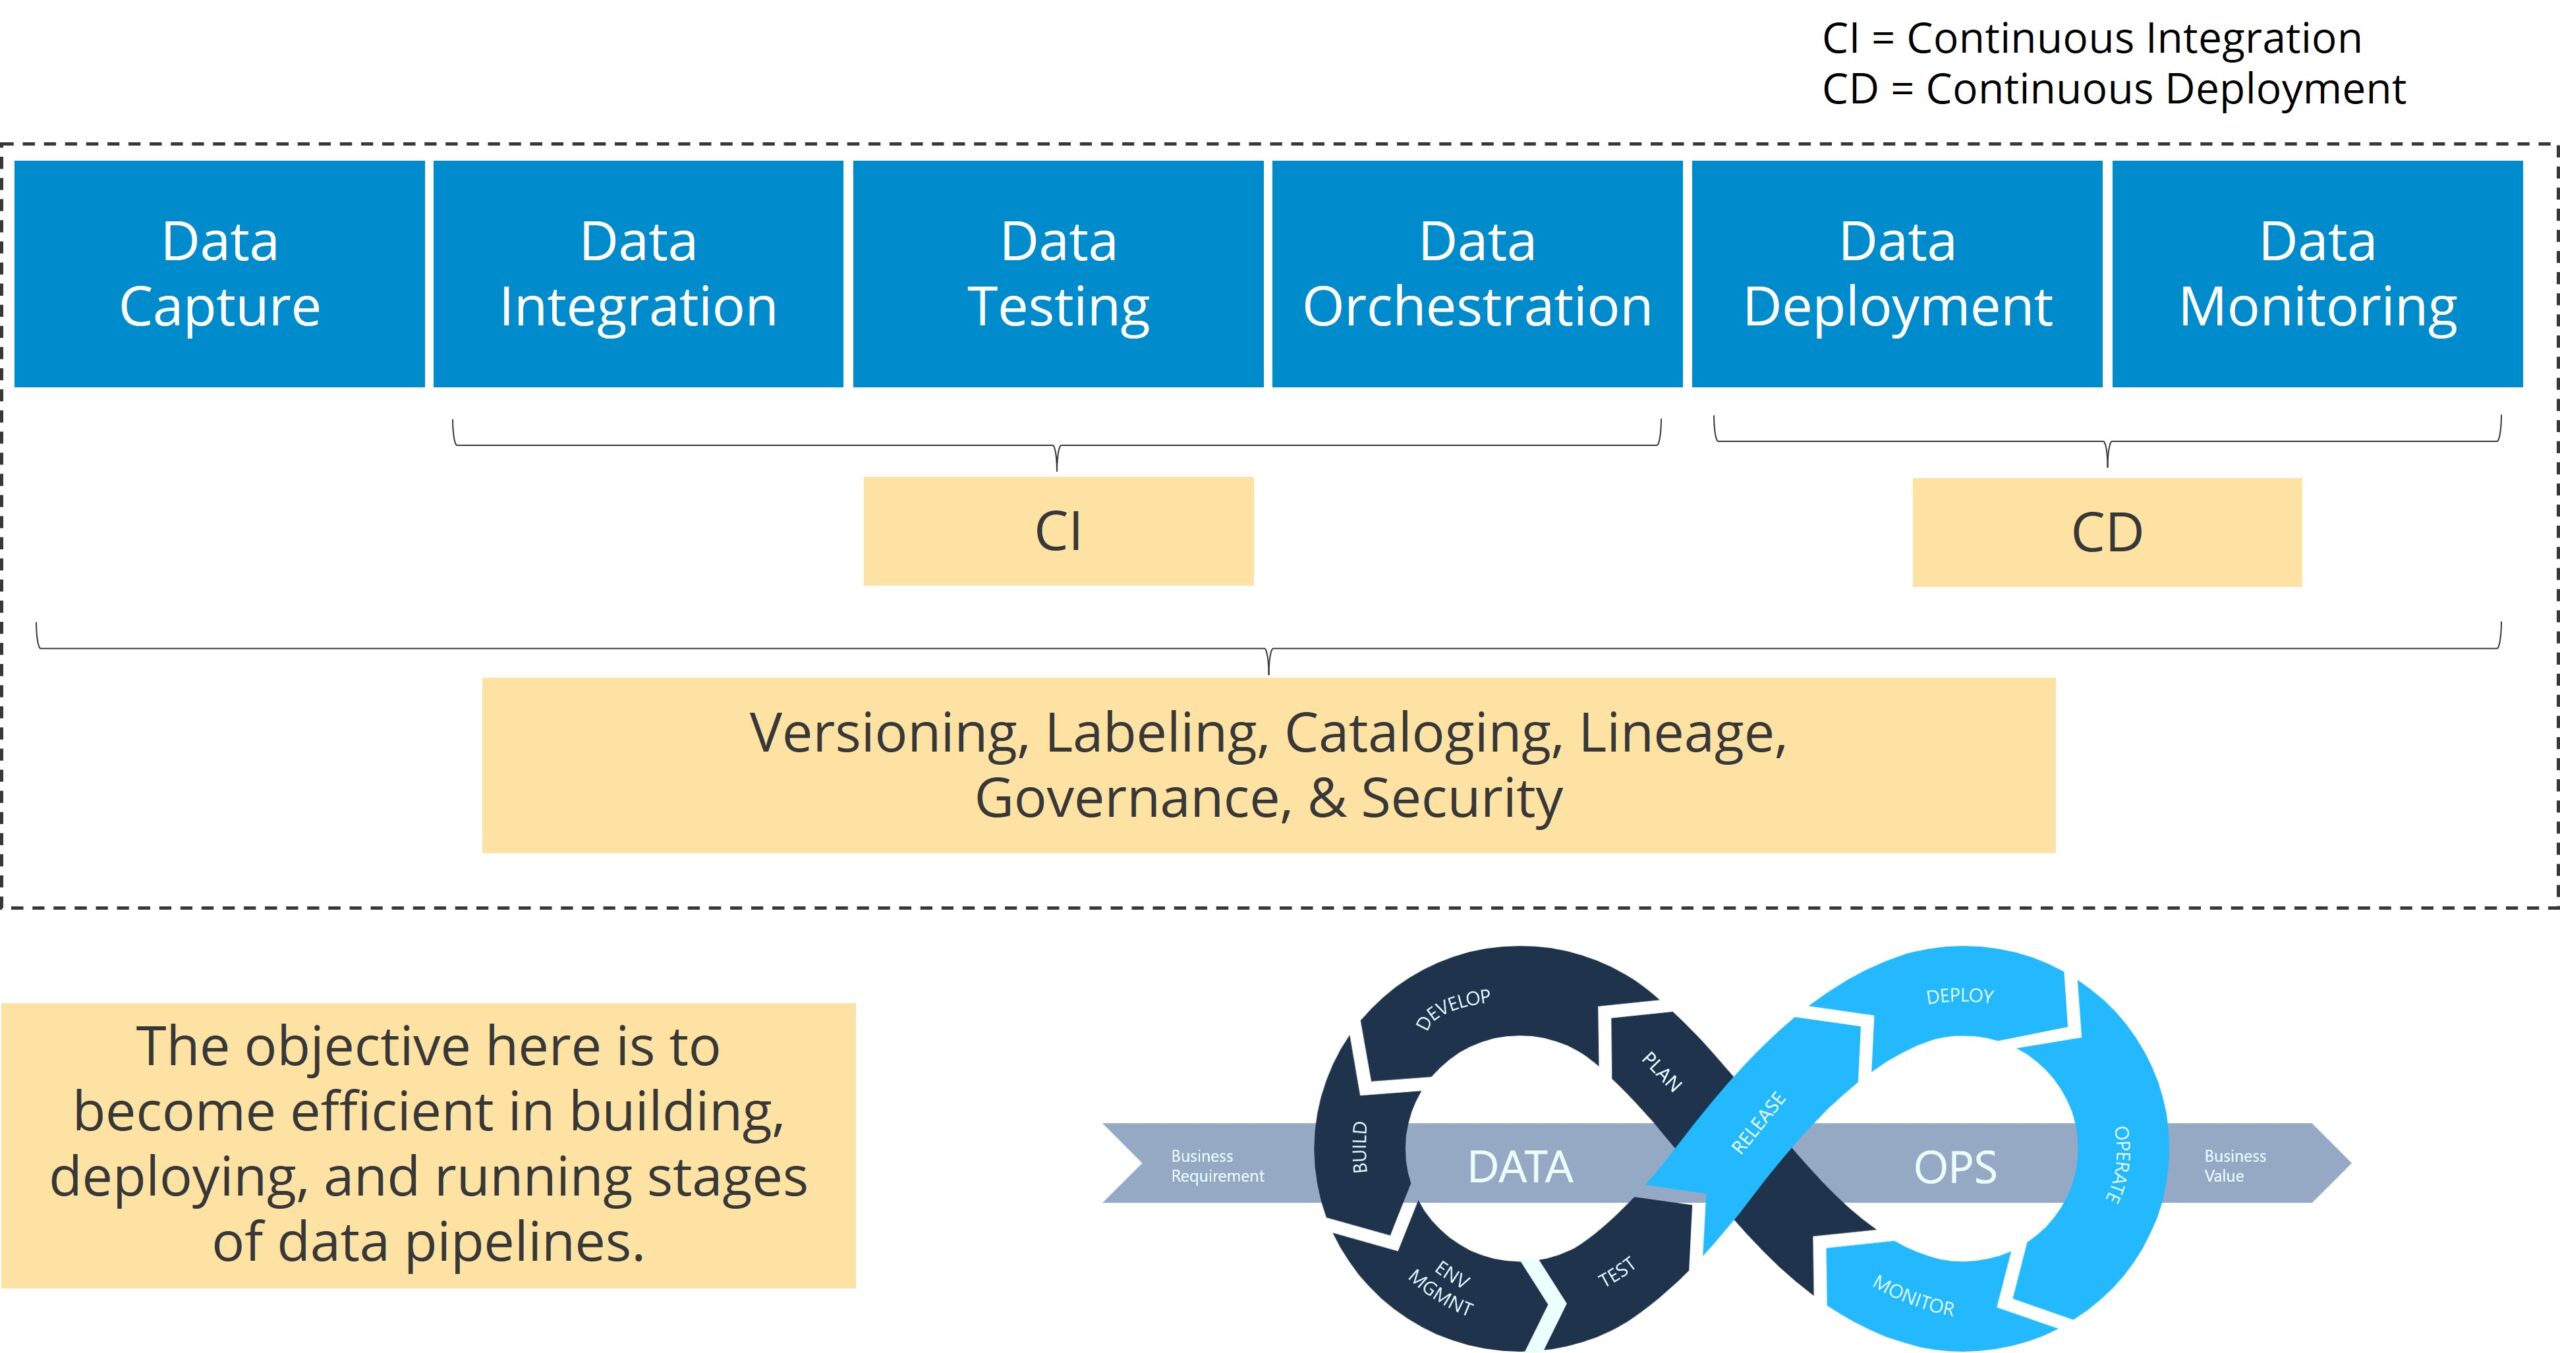 Enterprise Federated DataOps architecture